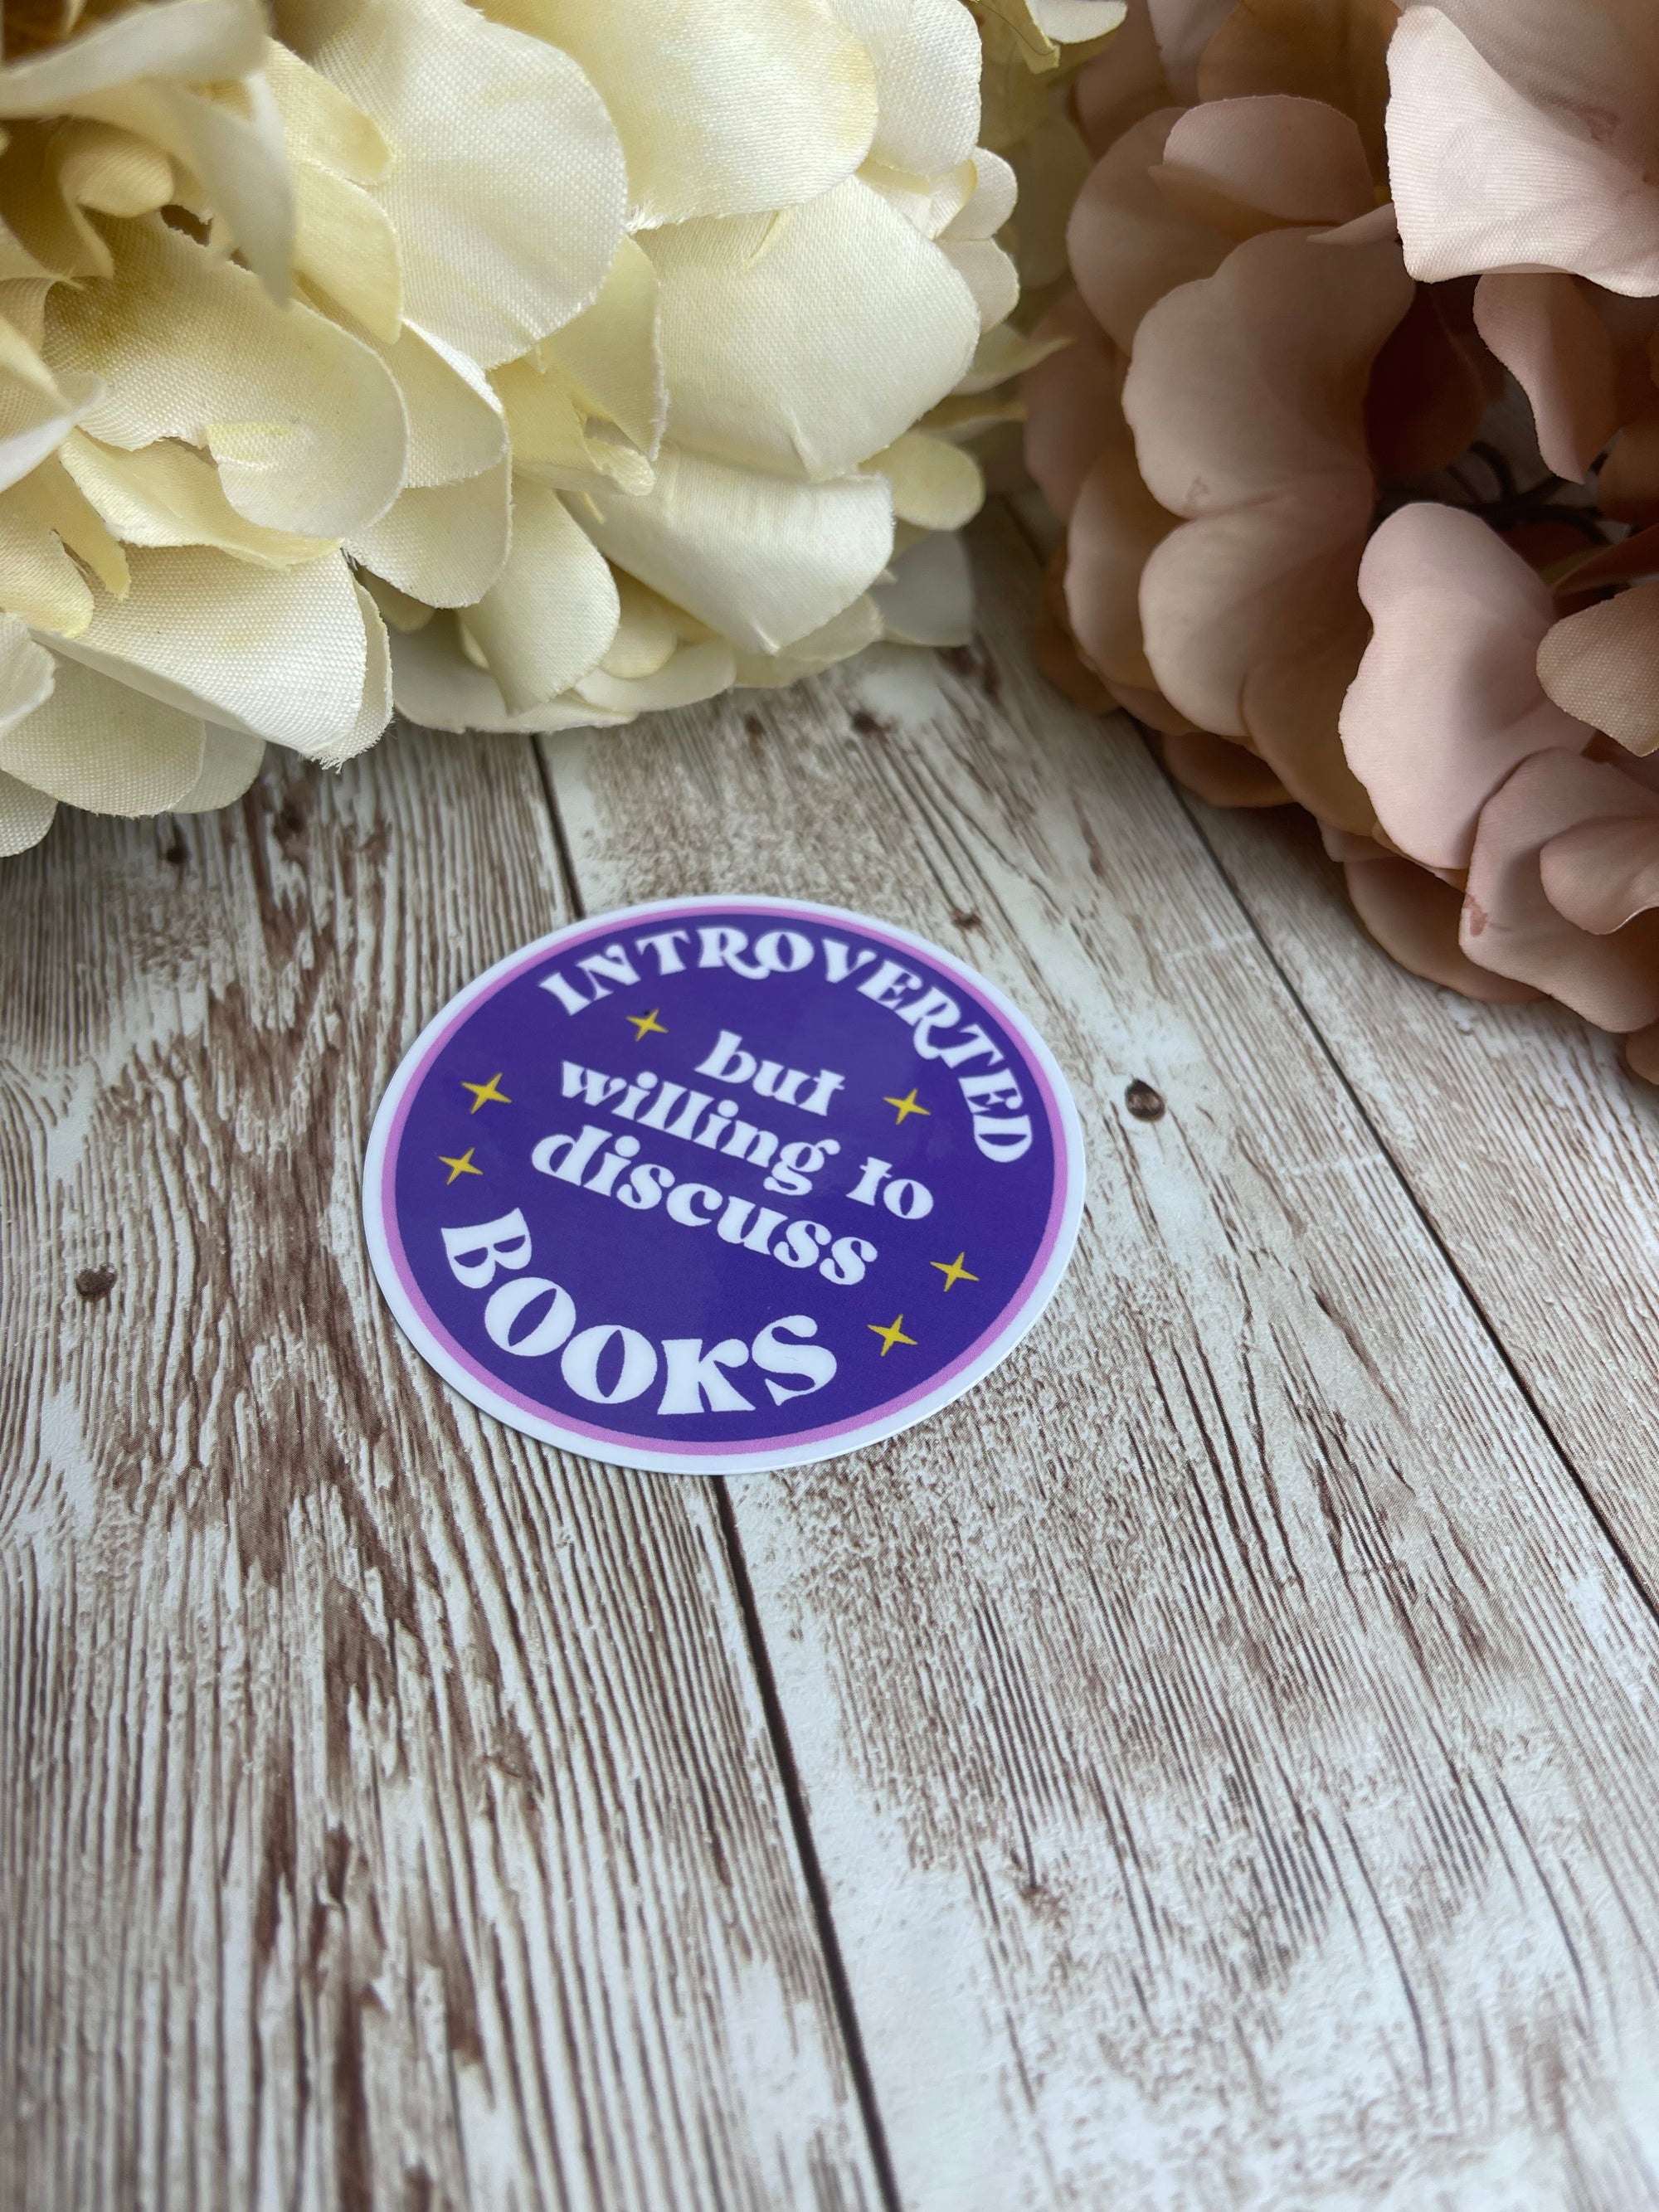 Introverted but willing to discuss books - Sticker